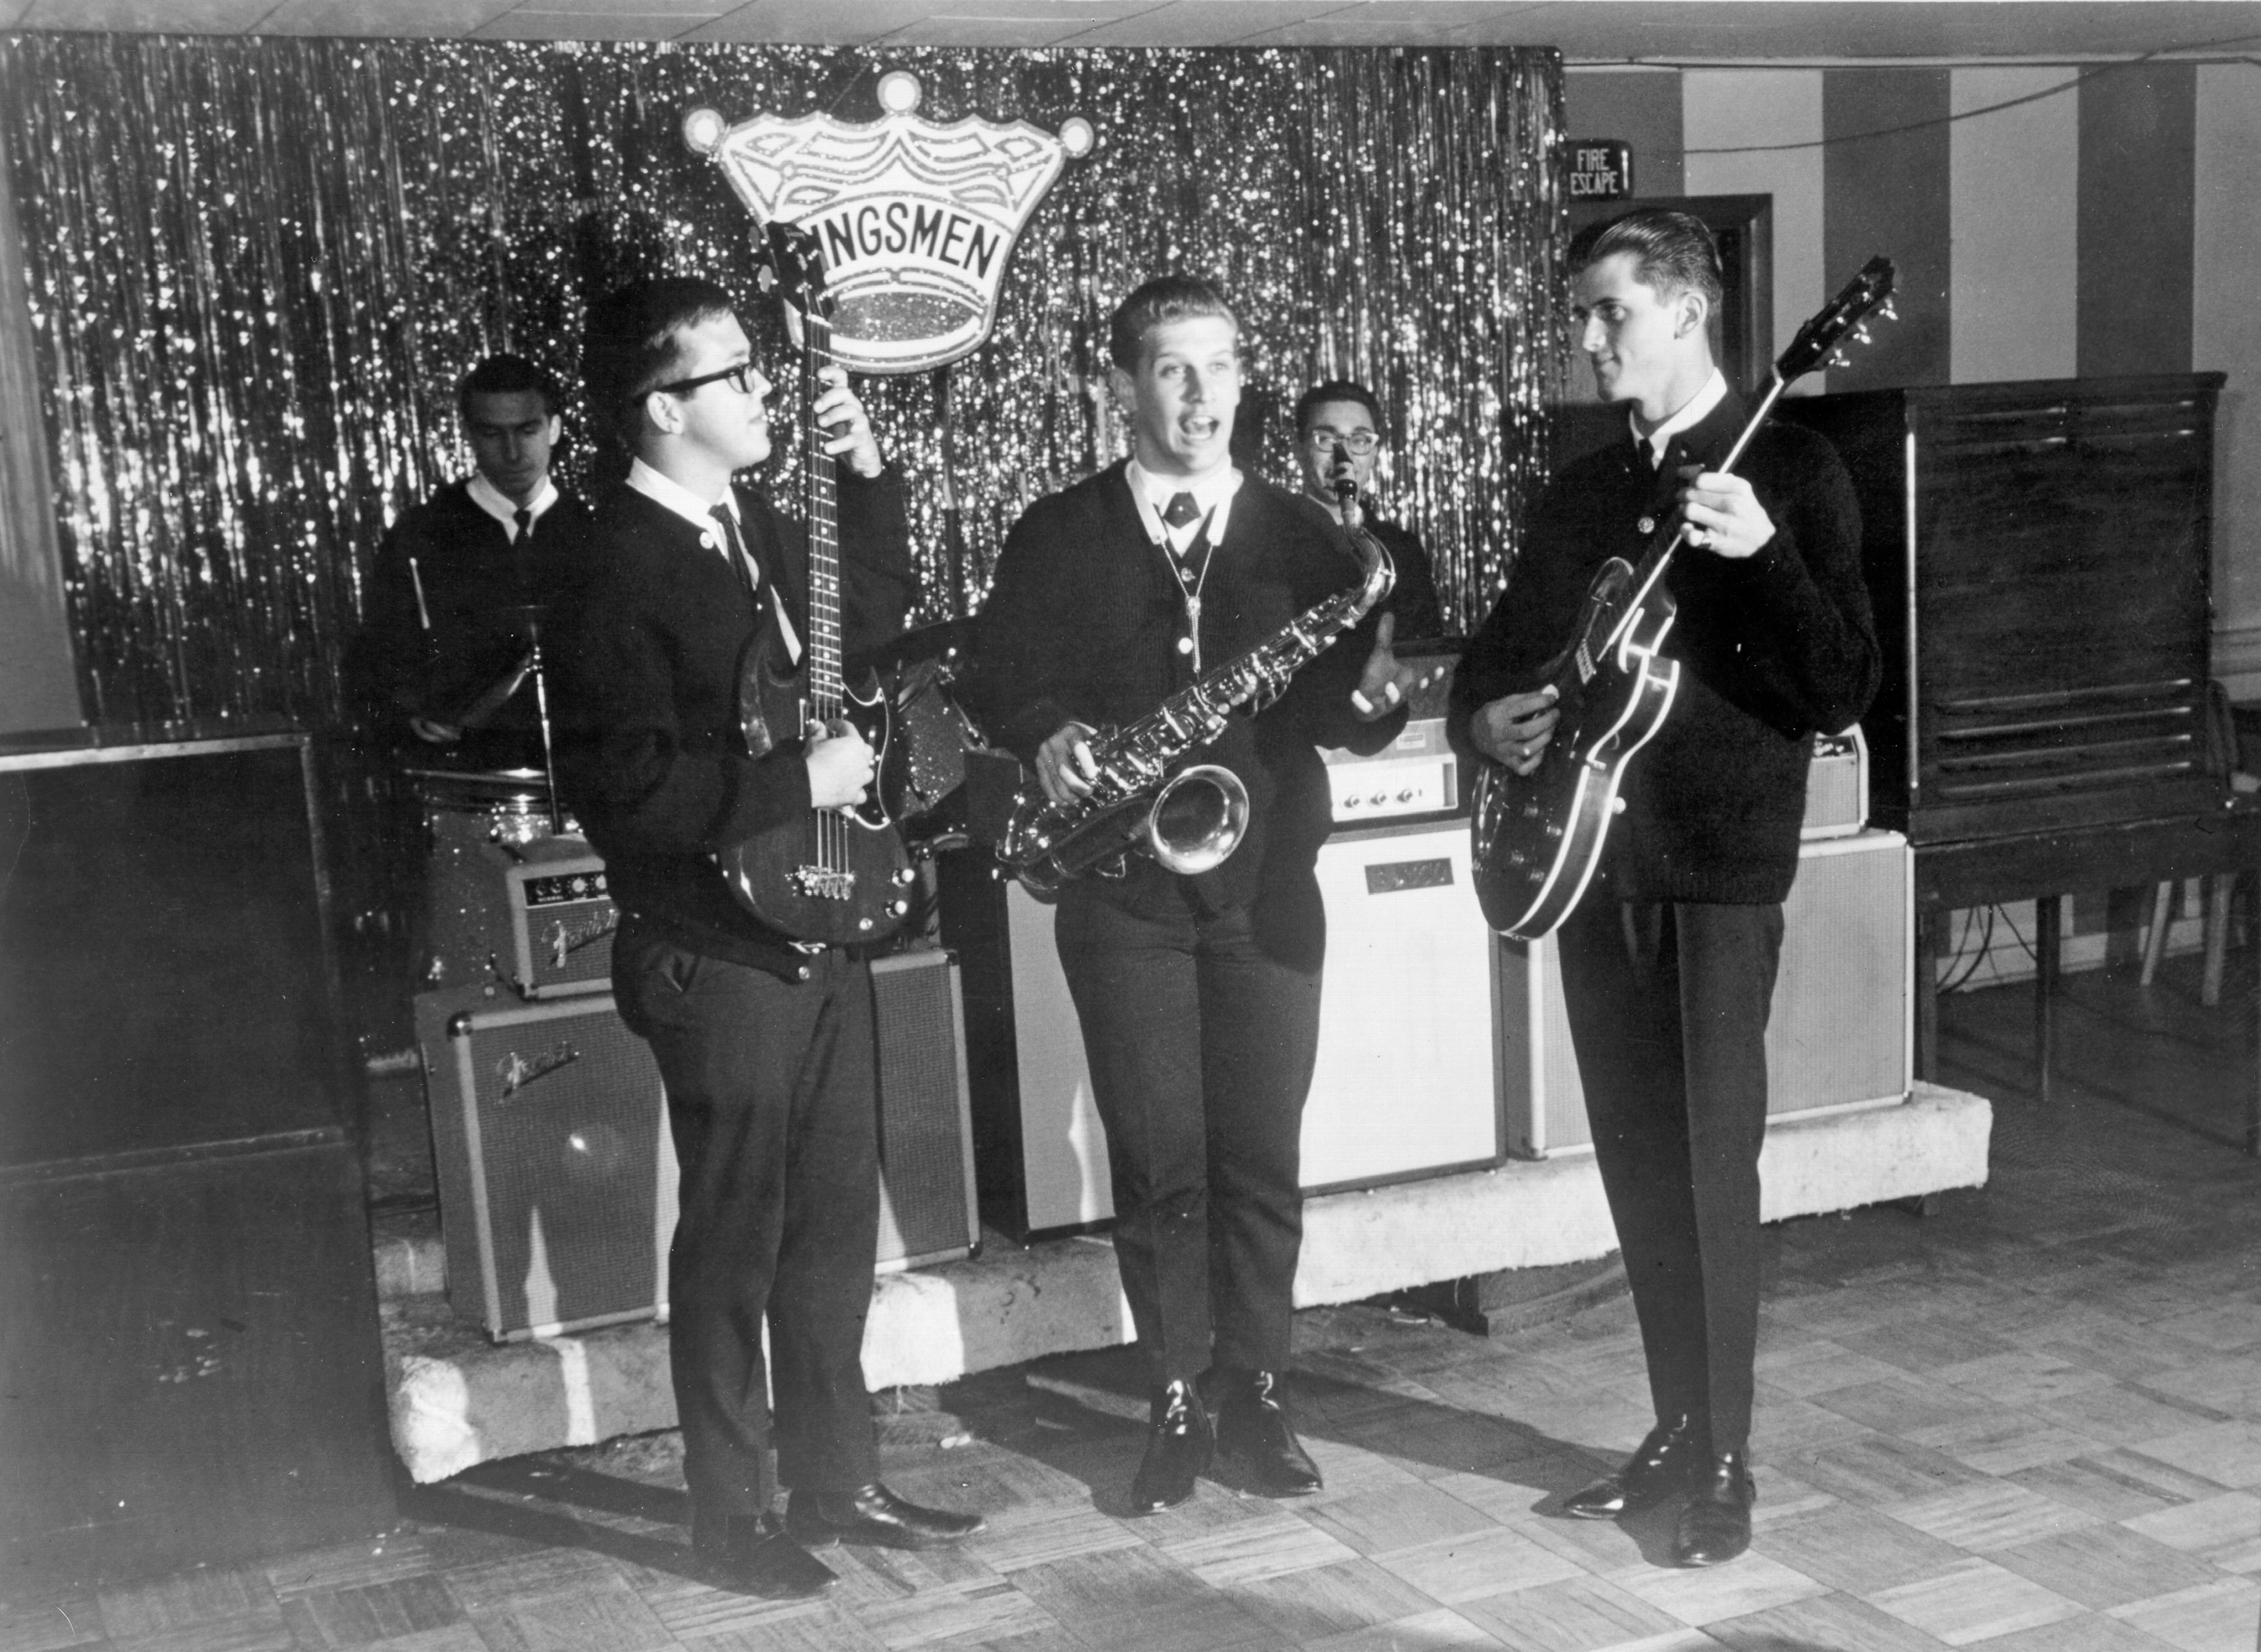 (L-R) Dick Peterson, Norm Sundholm, Lynn Easton, Barry Curtis and Mike Mitchell of the rock and roll band "The Kingsmen" pose for a portrait in circa 1965. 